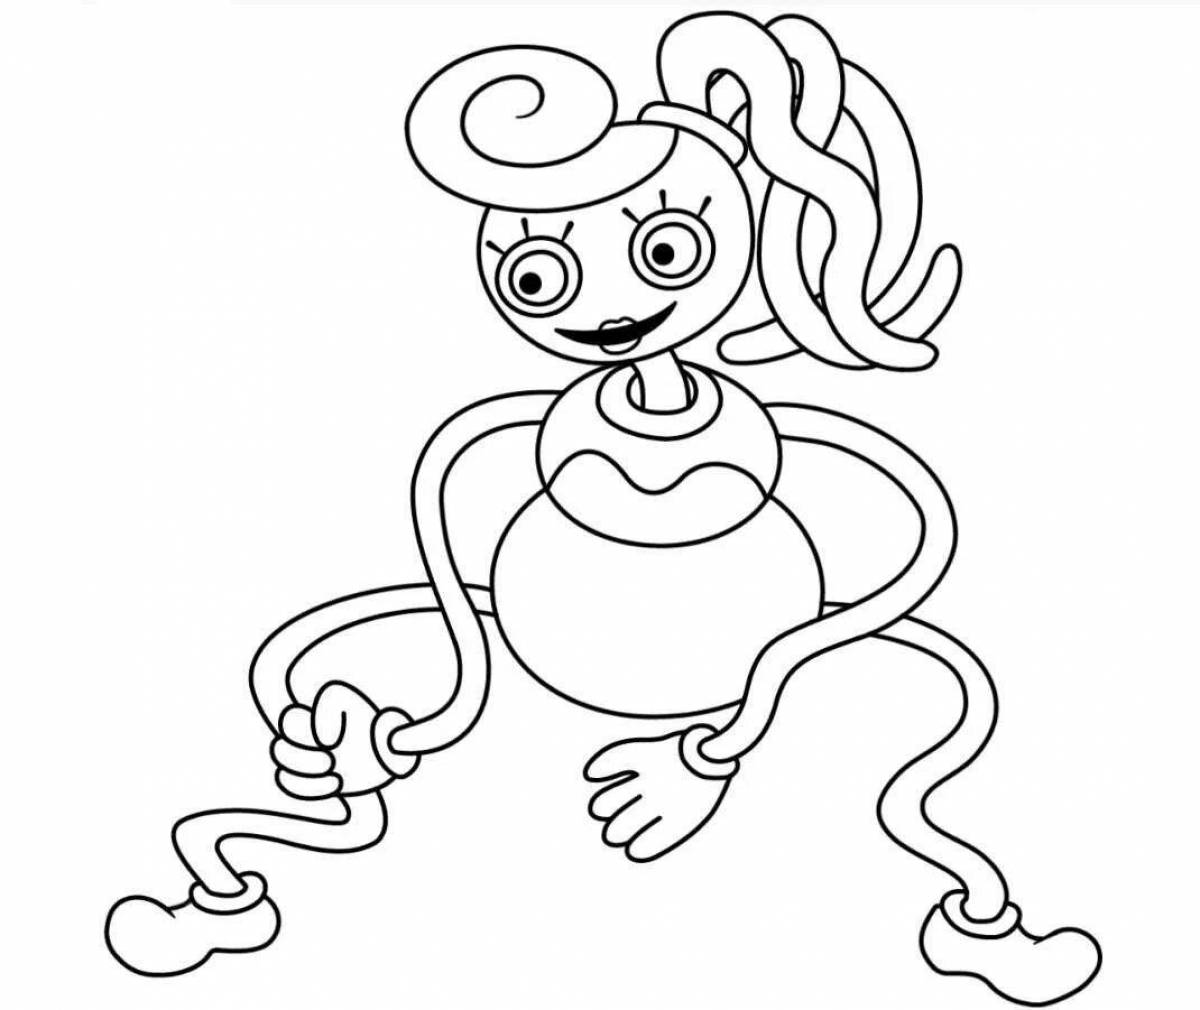 Colorful pippi play time coloring page